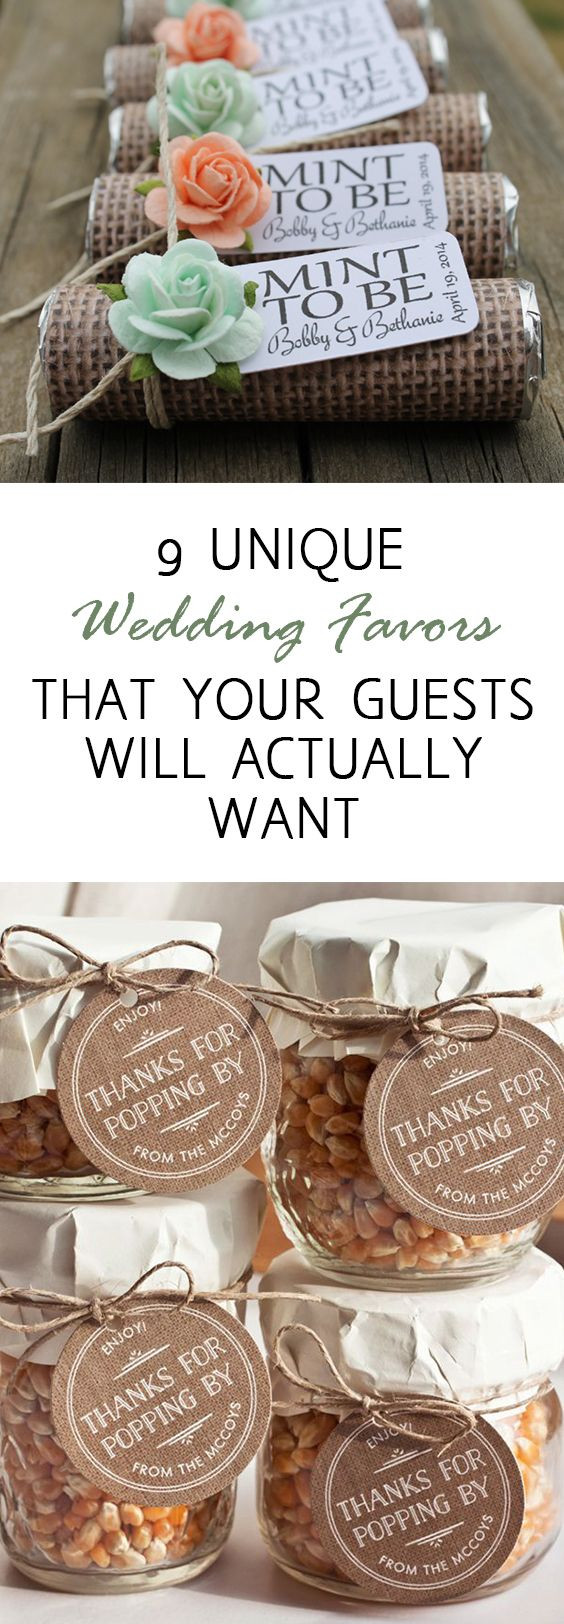 Wedding Party Gift Ideas Cheap
 9 Unique Wedding Favors that Your Guests Will Actually